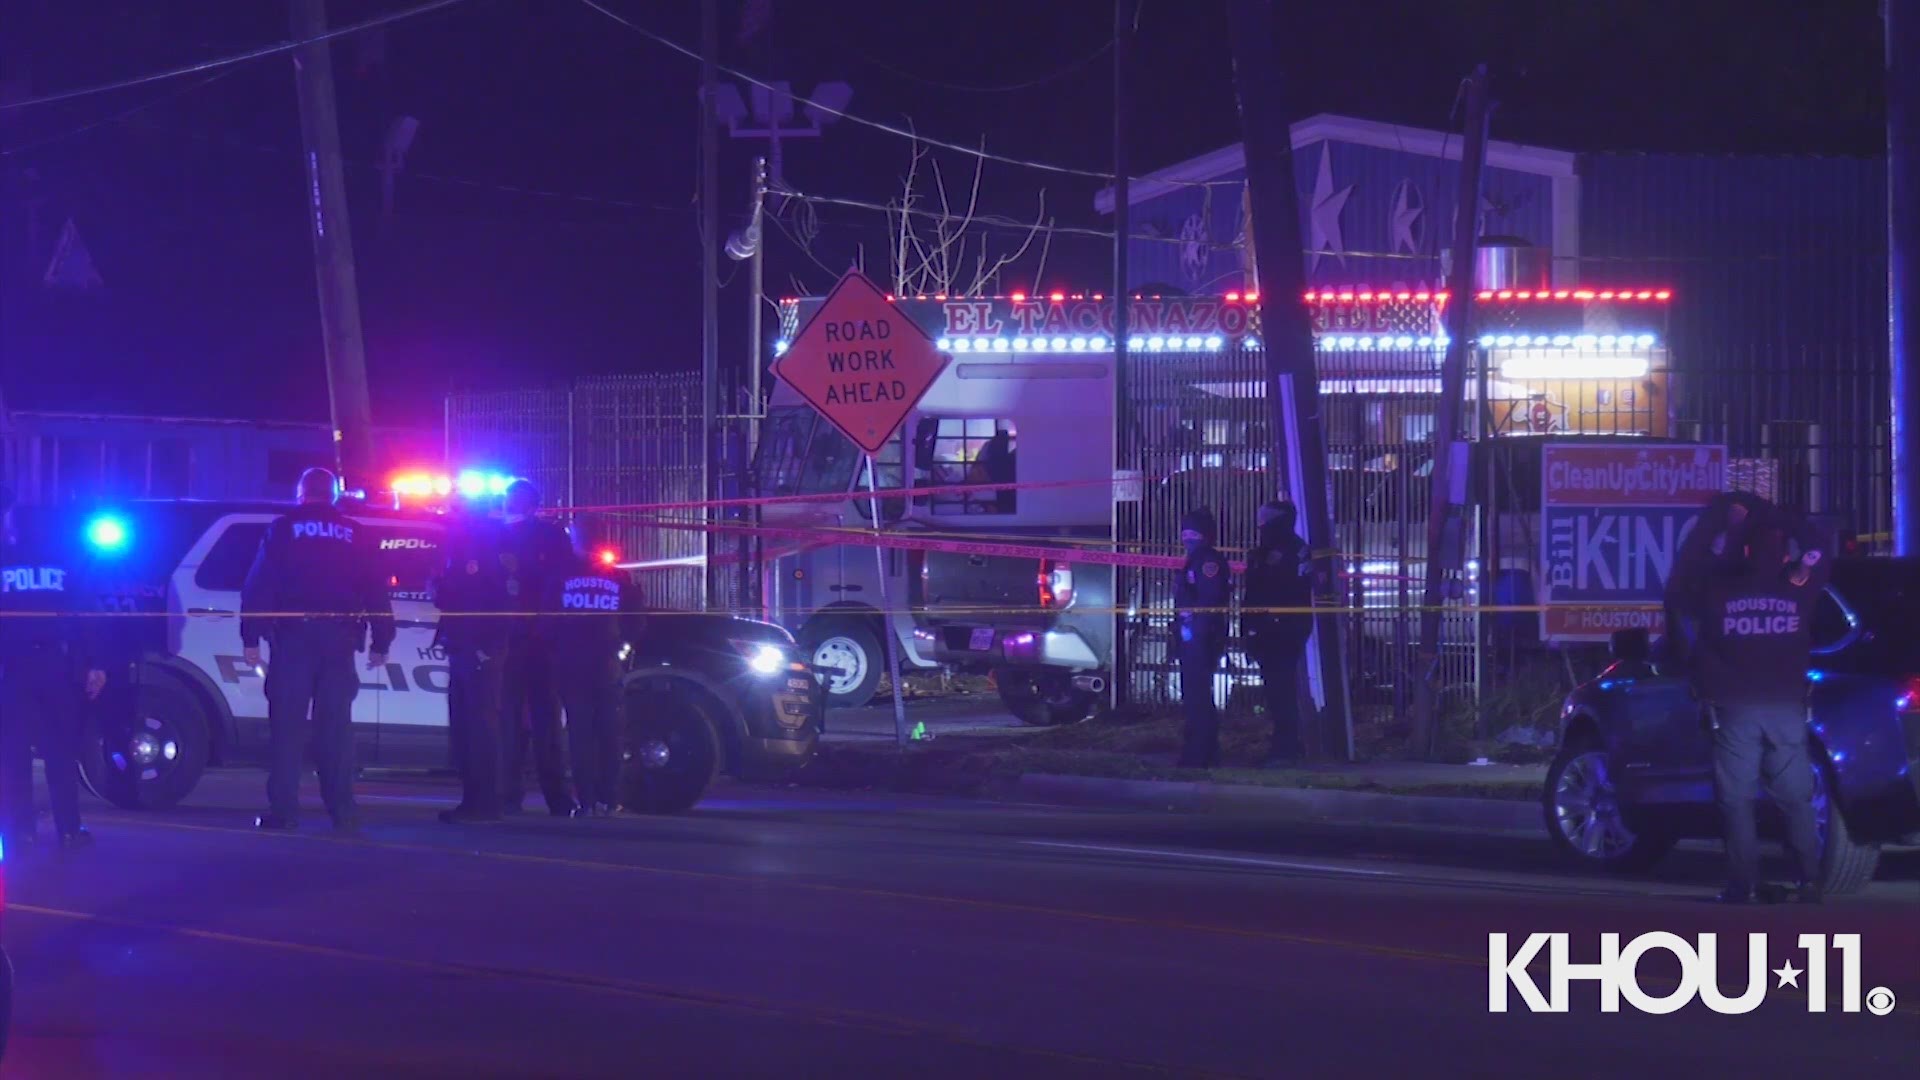 Houston Police are investigating after a robbery suspect was struck during an officer-involved shooting Wednesday night in north Houston.